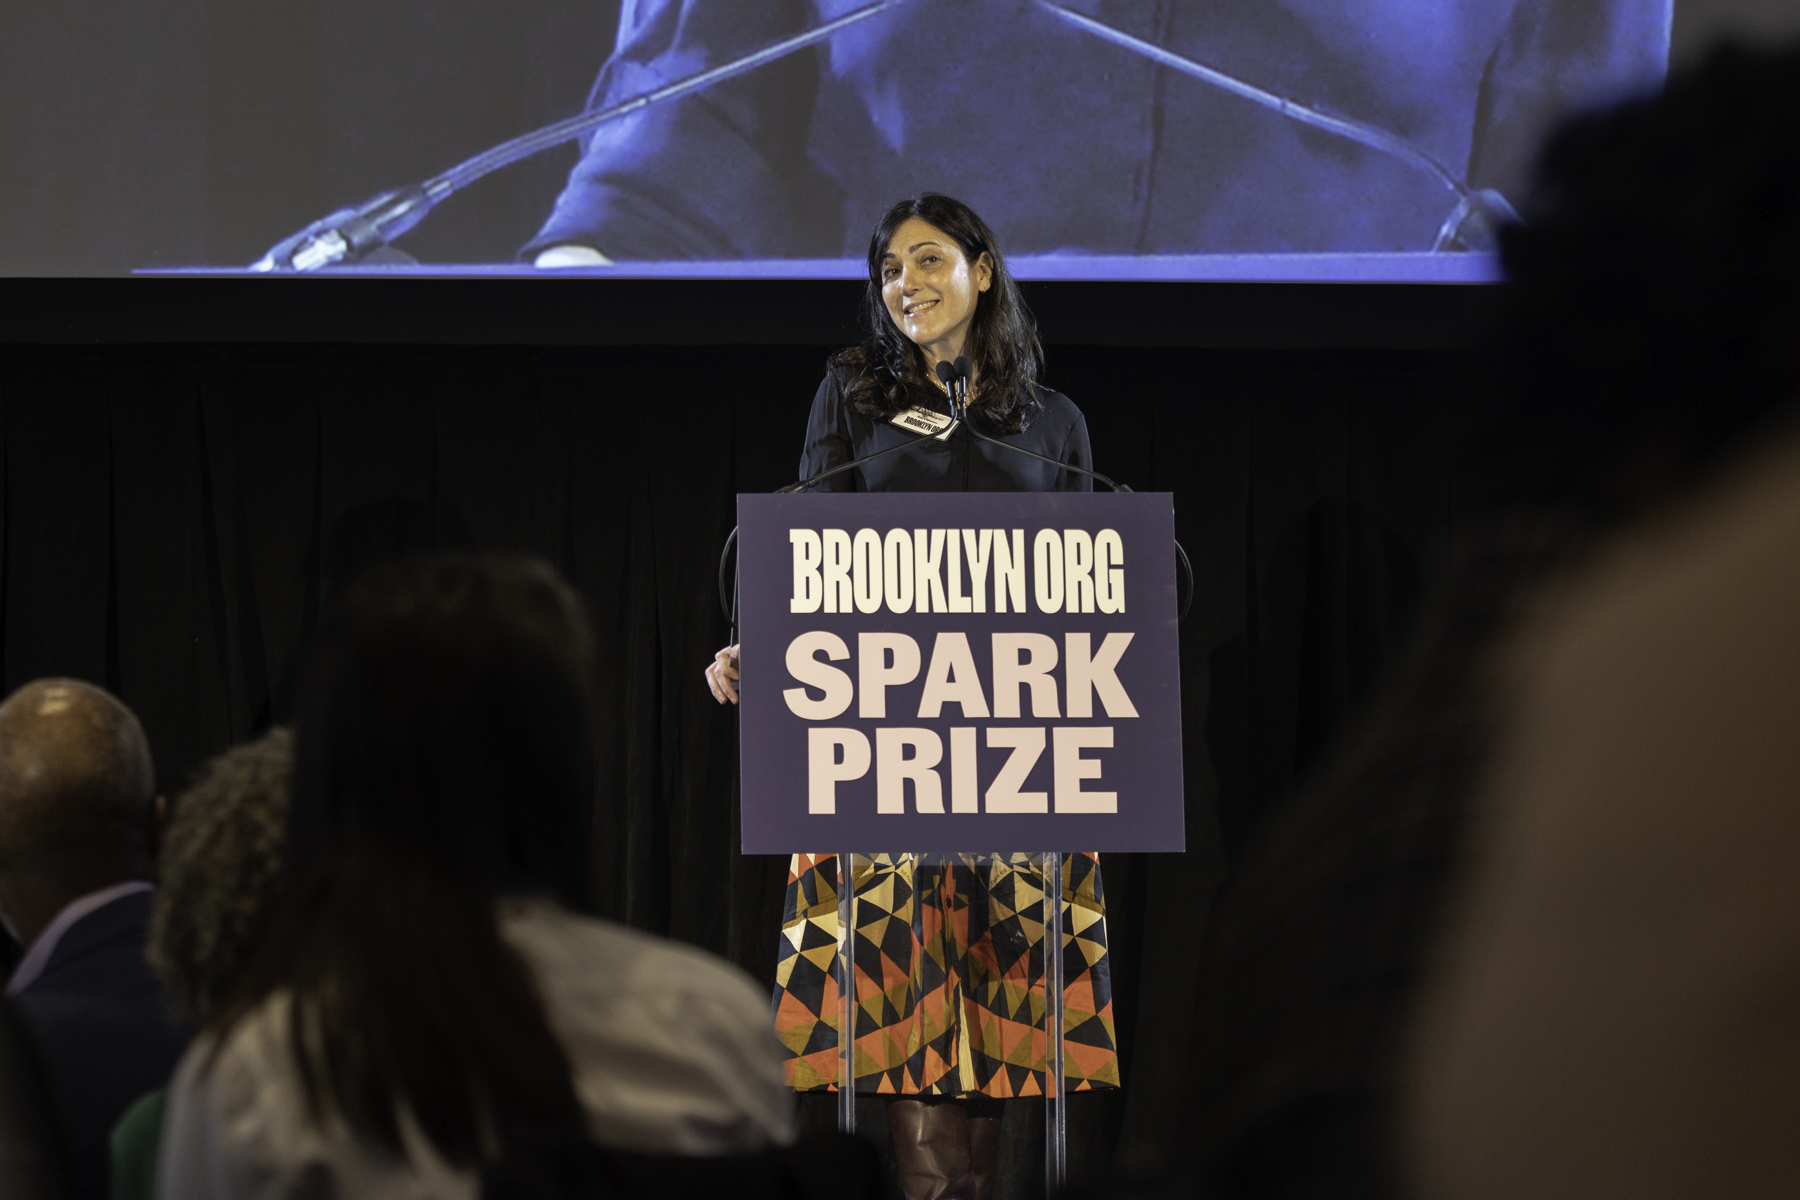 Woman speaking at a podium with the brooklyn.org spark prize sign.